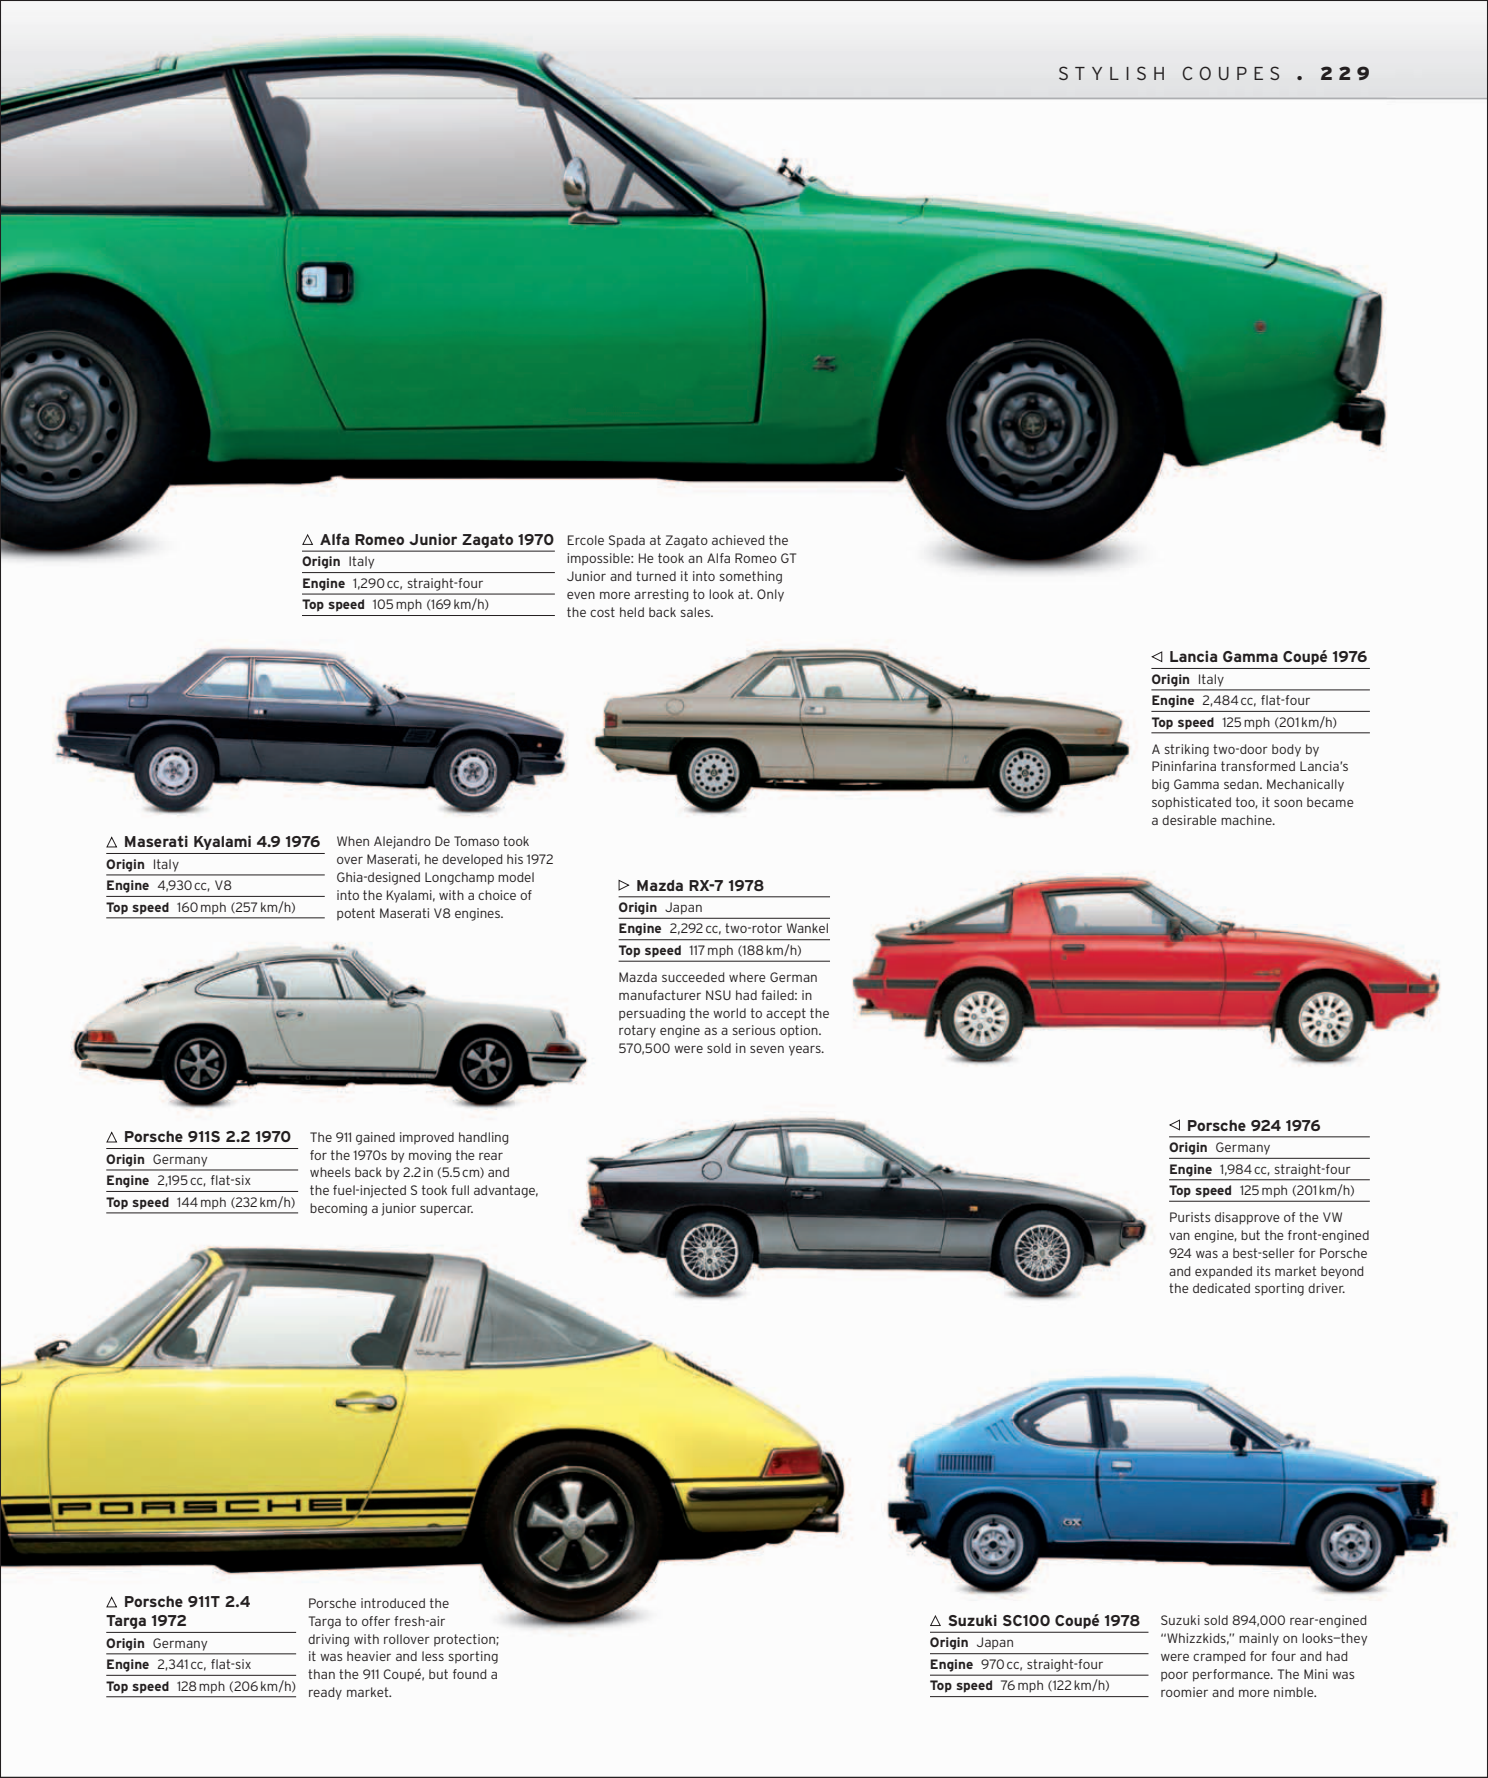 Car%20-%20The%20Definitive%20Visual%20History%20of%20the%20Automobile_231.png